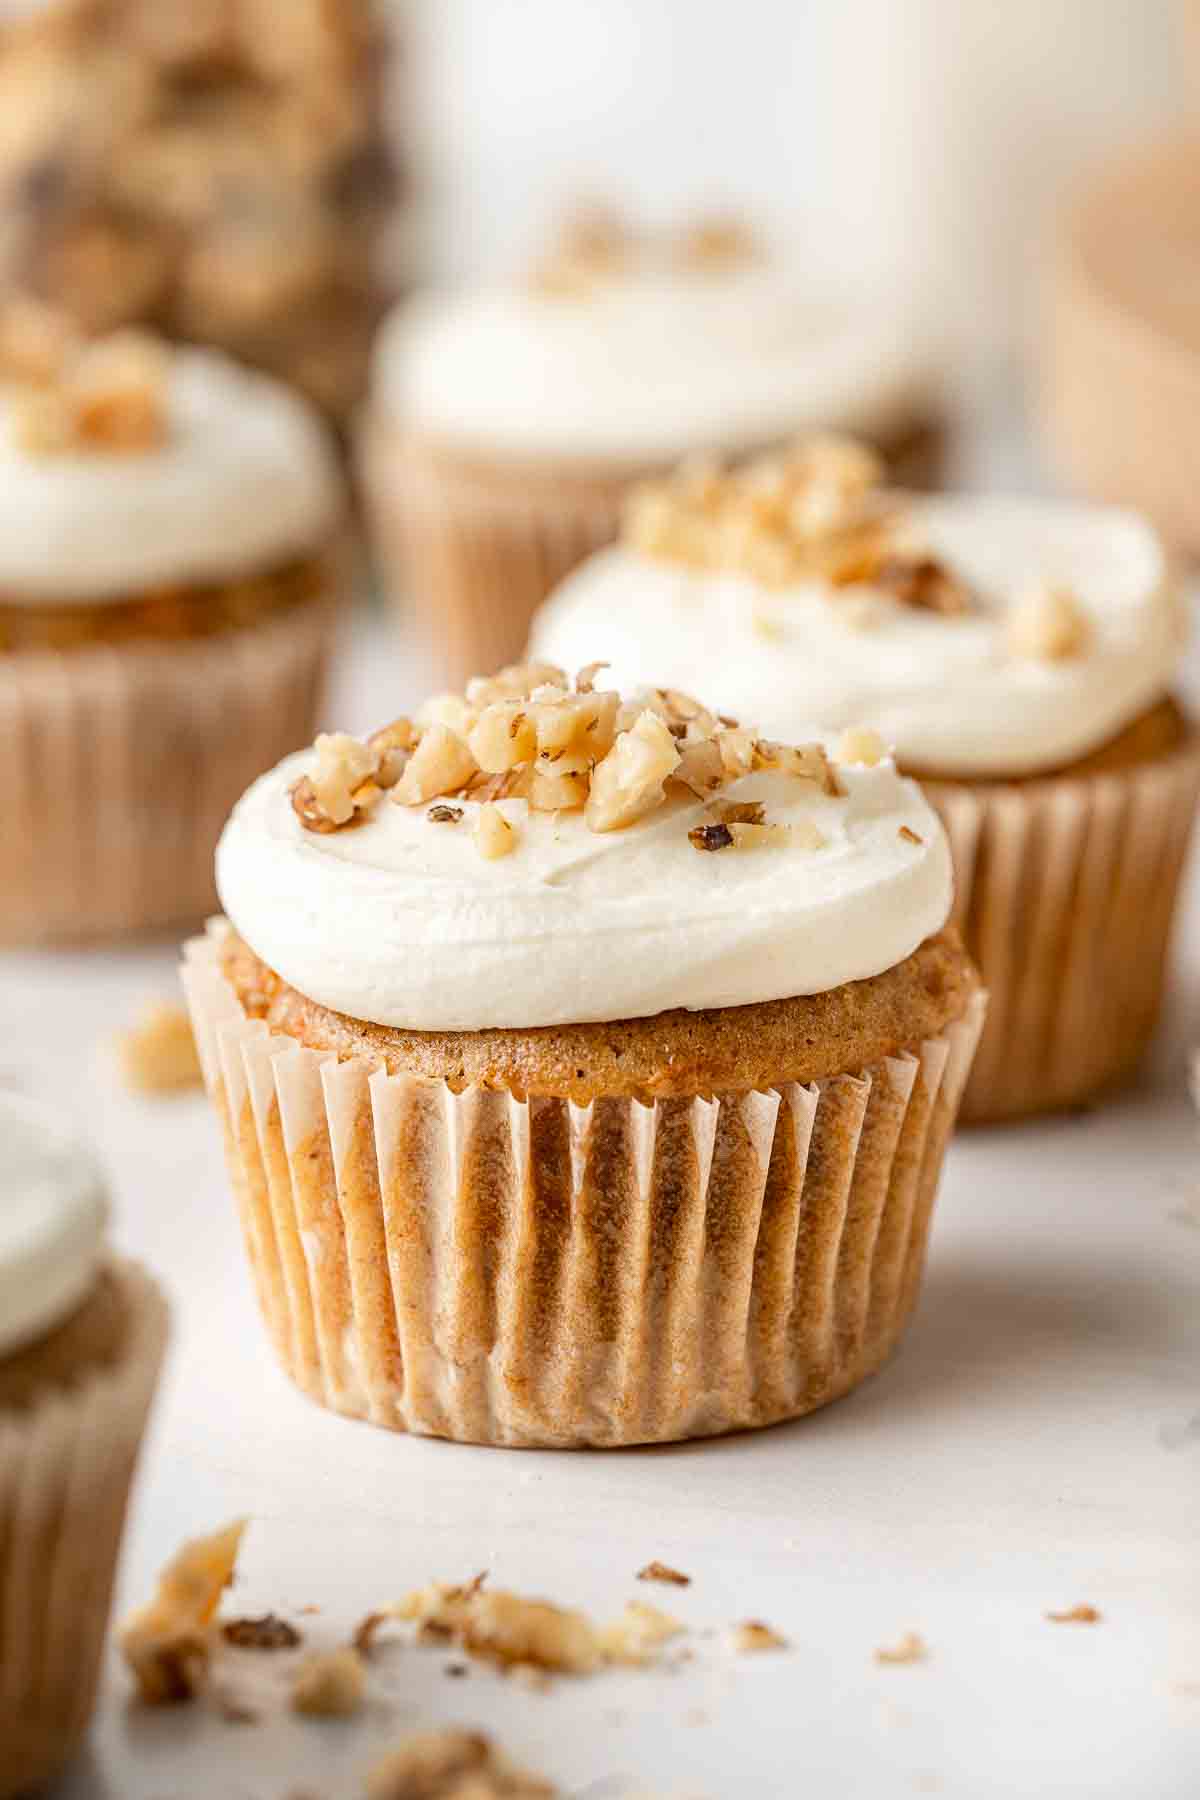 Close up of a vegan carrot cake cupcake topped with cream cheese frosting and crushed walnuts.